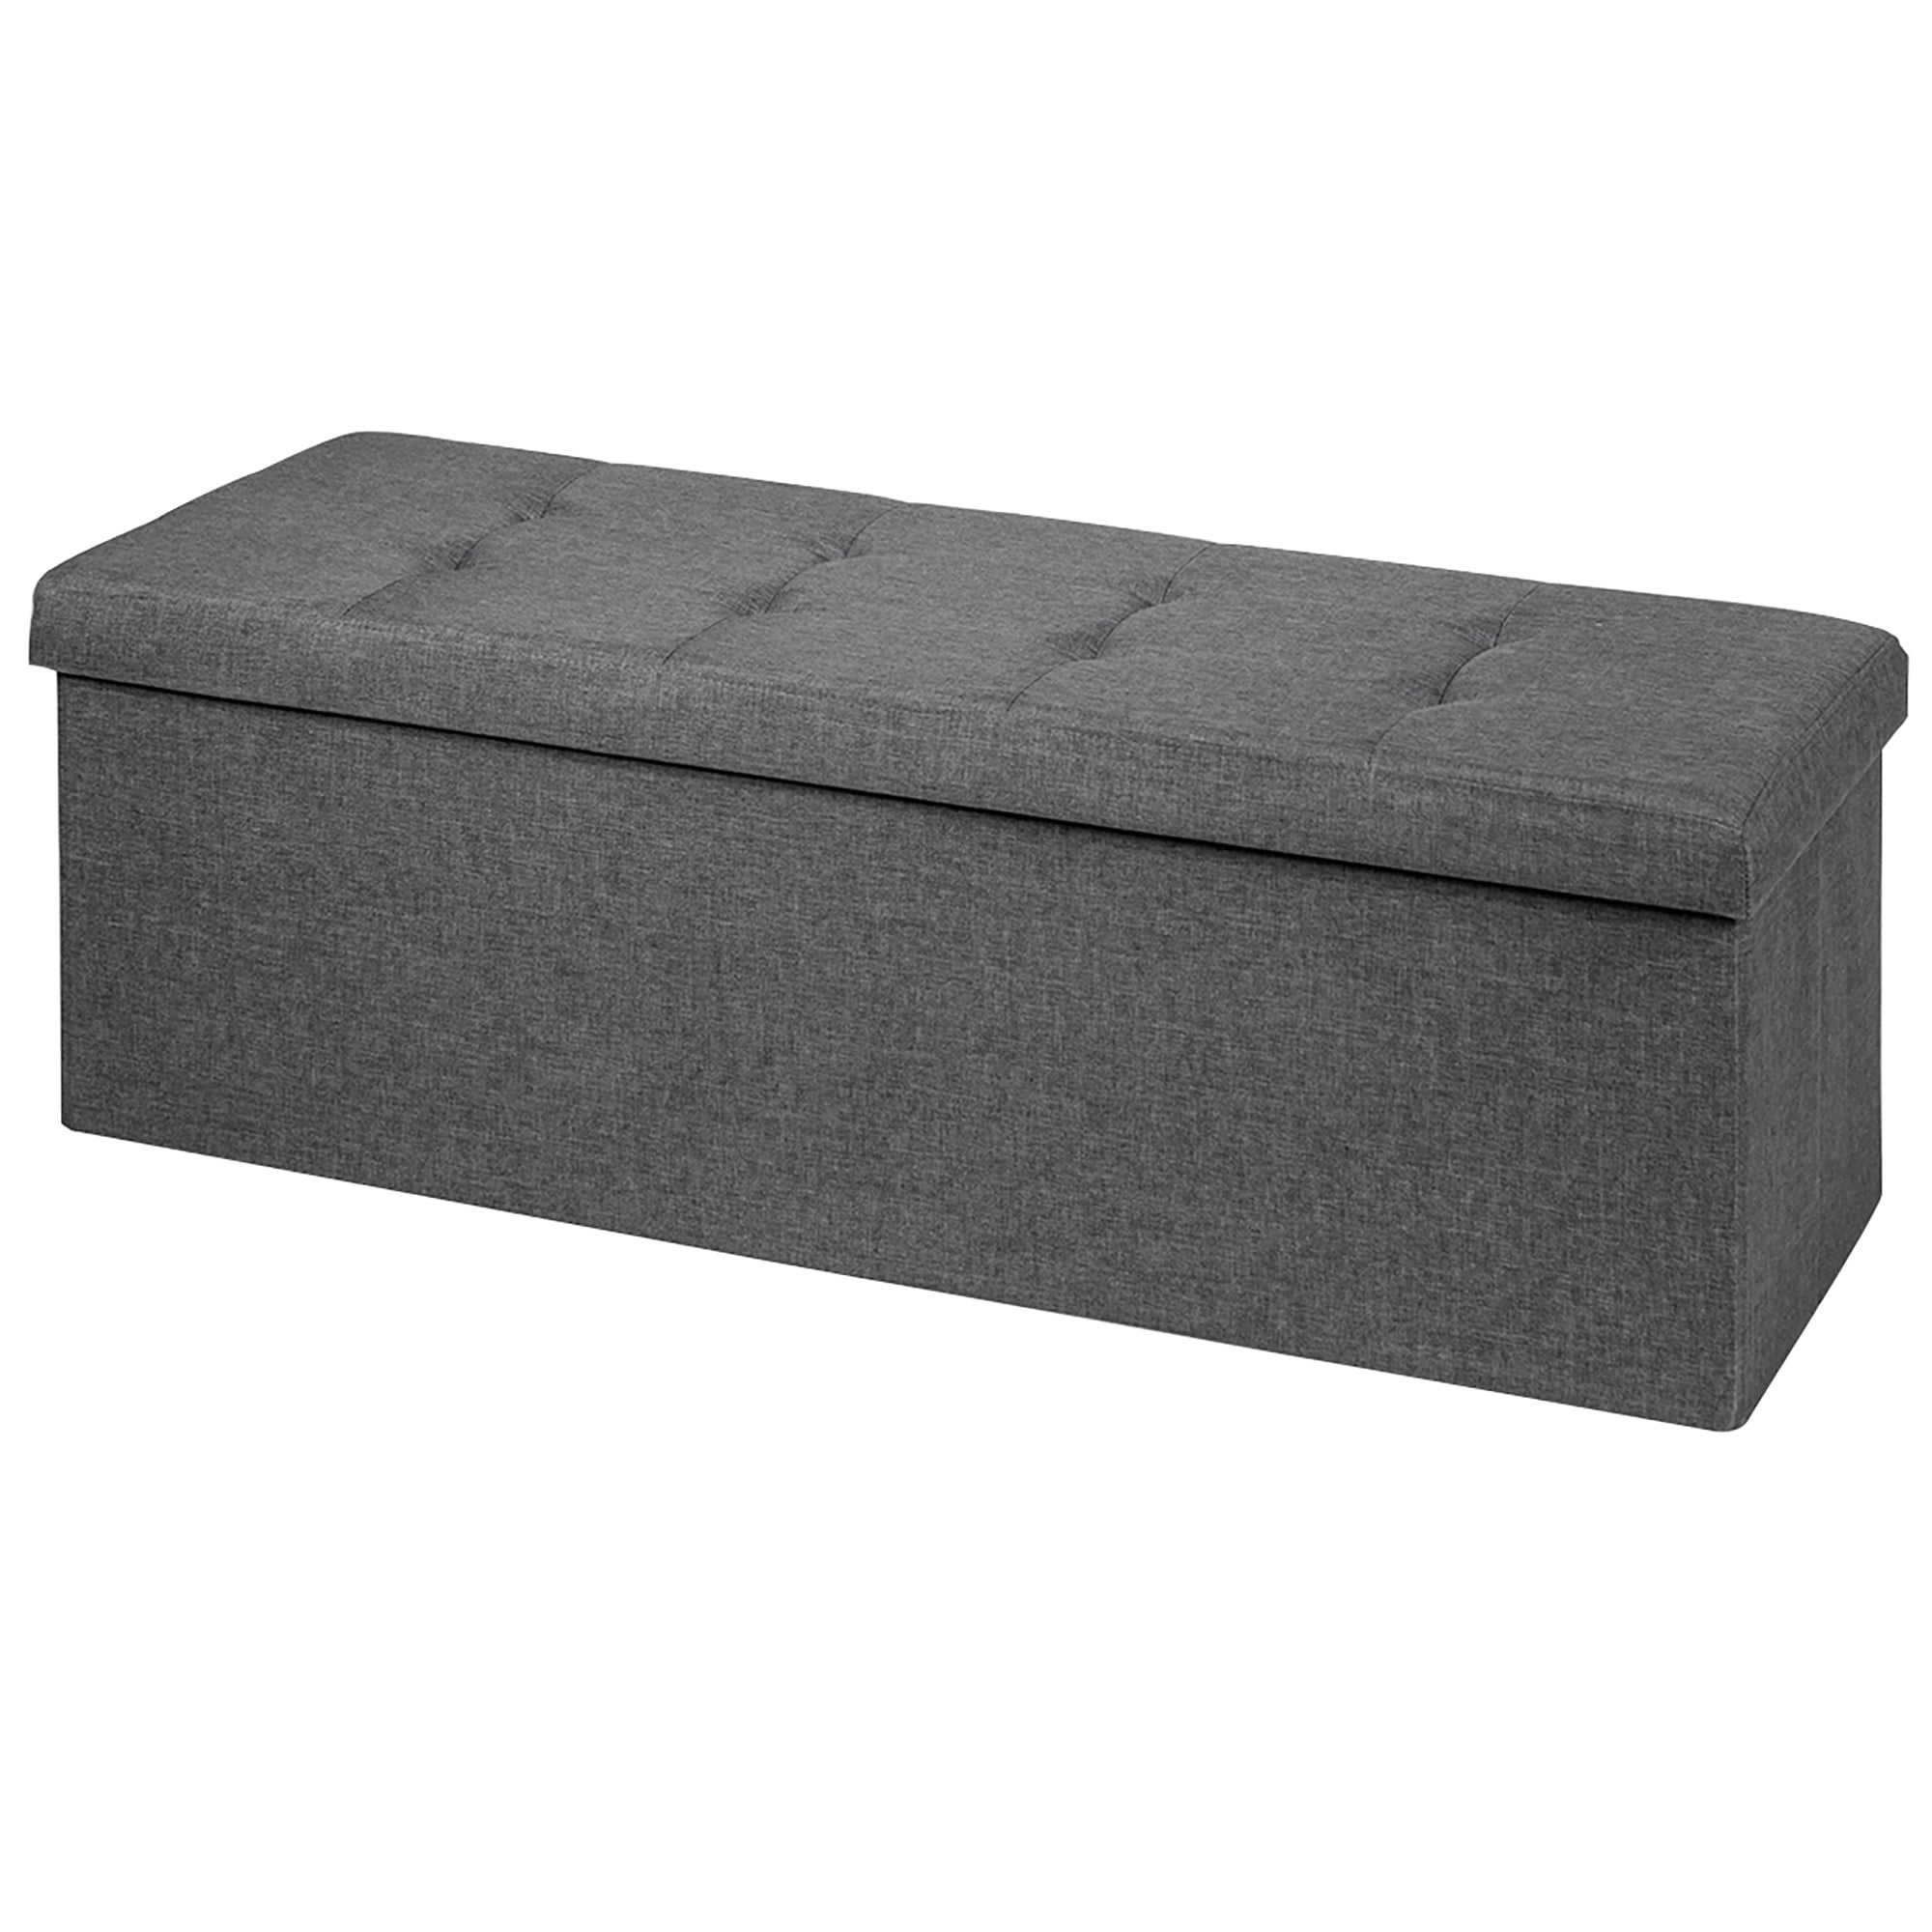 Fabric Footstool in dark grey/charcoal  storage box Brand new Large 